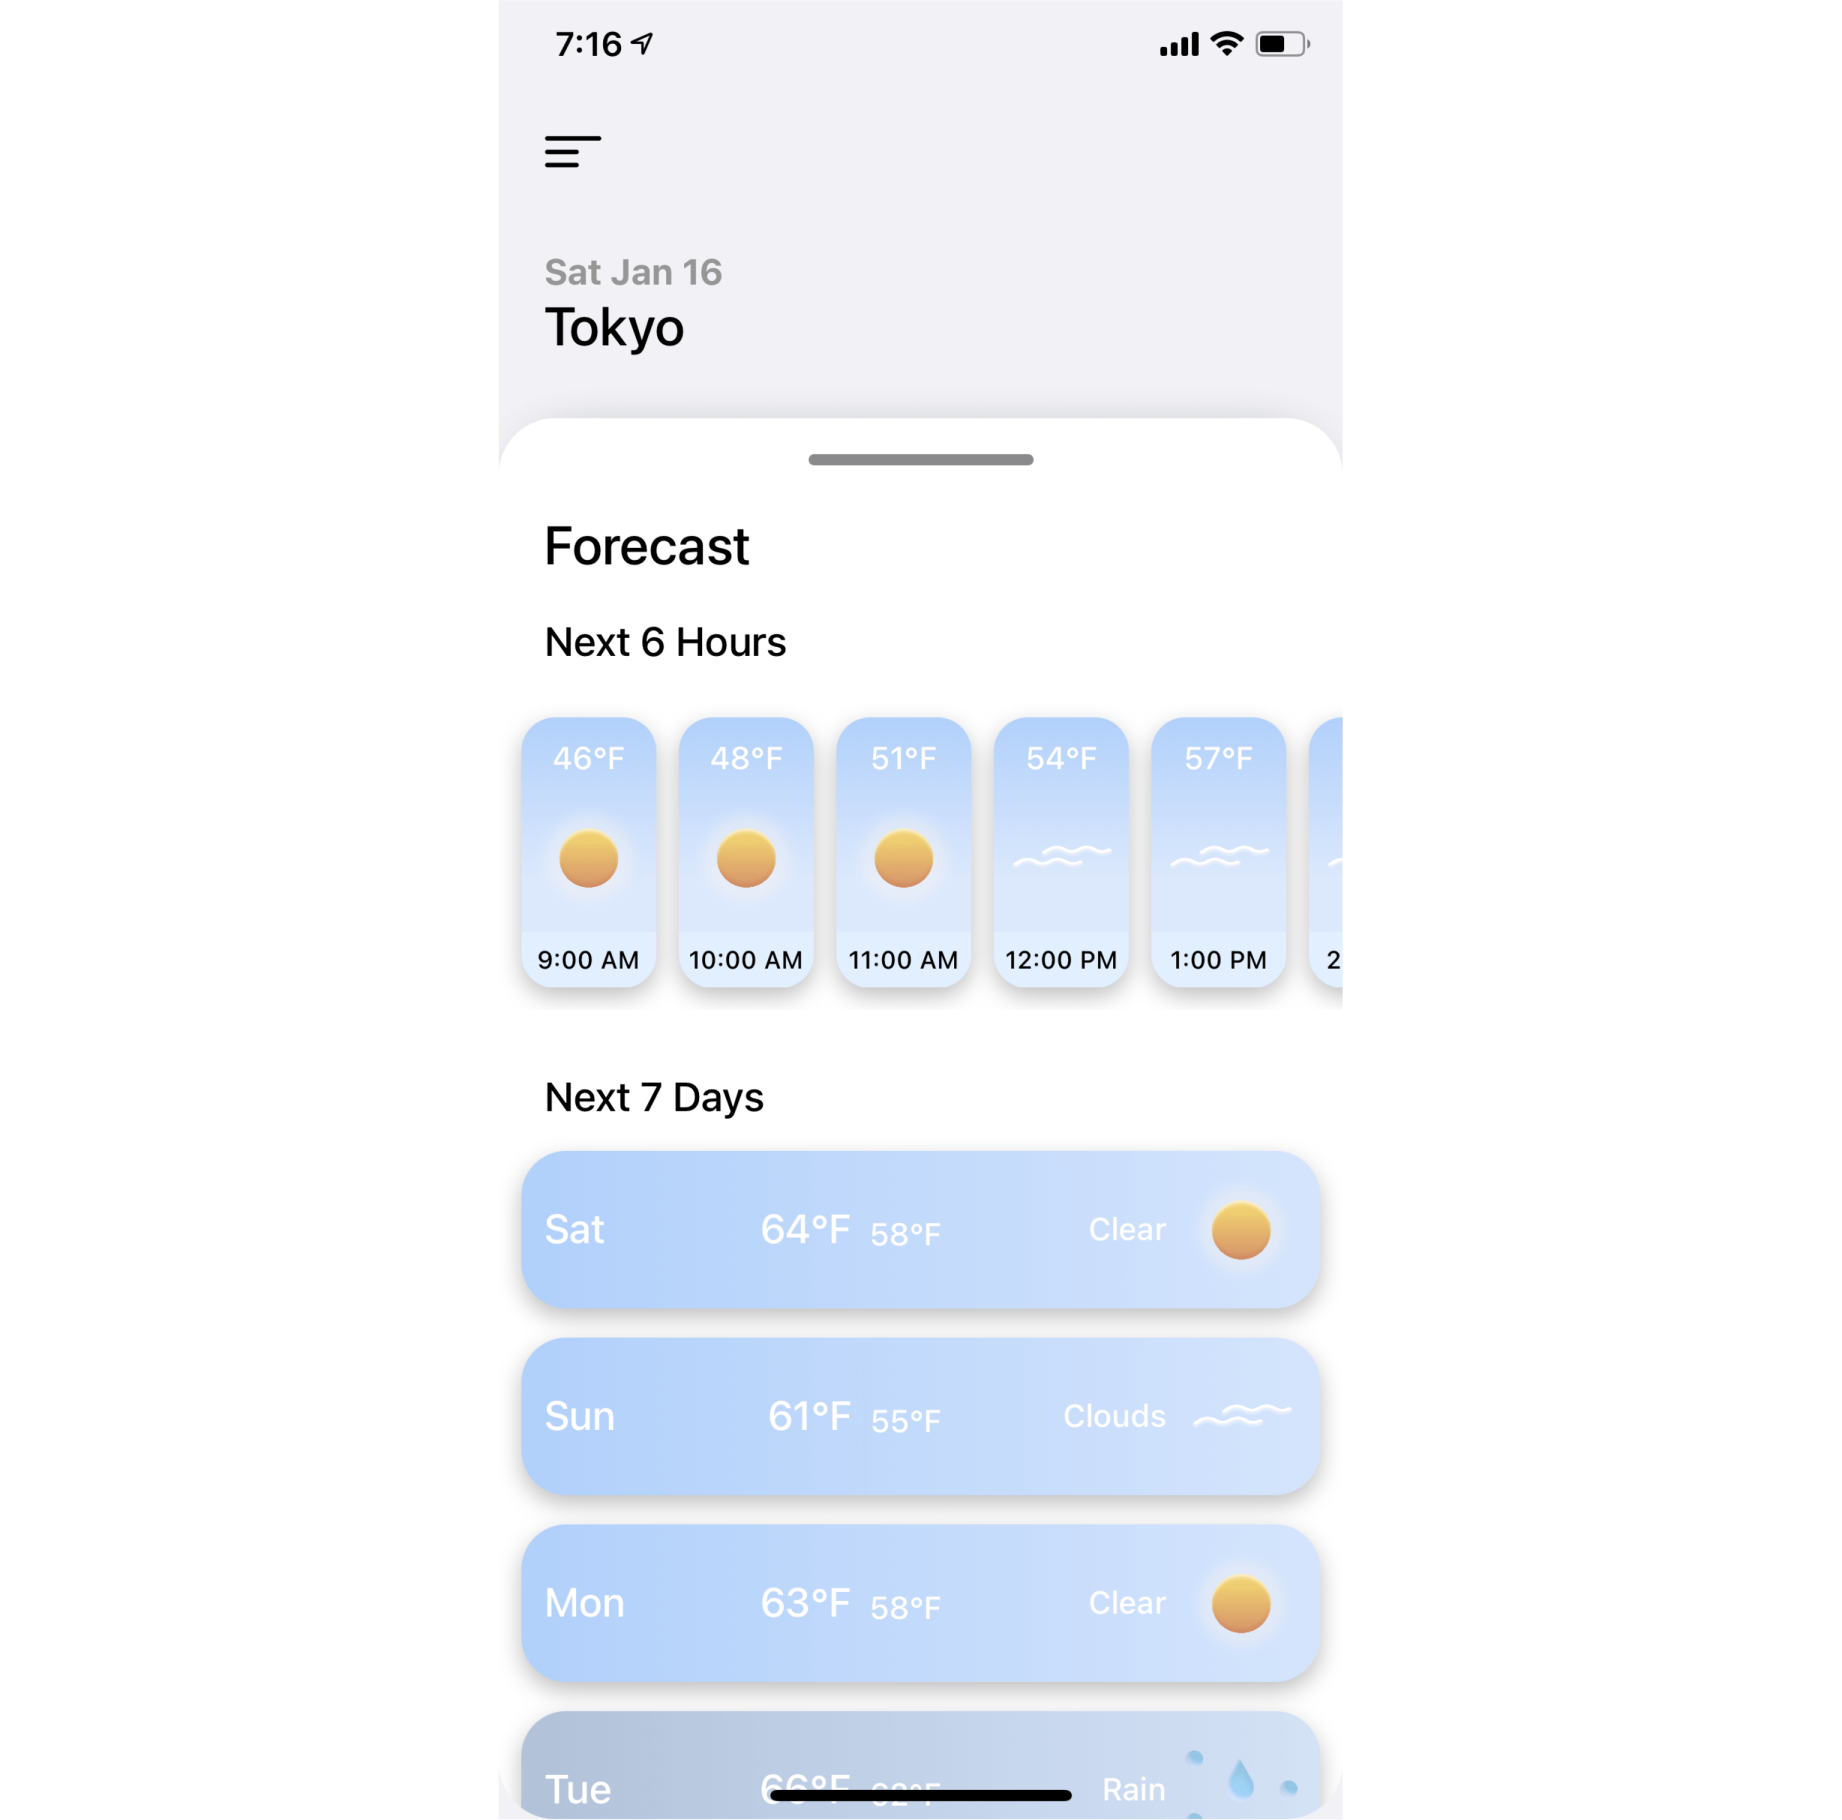 Screenshot of Sunshine's forecast panel. It showcases the 2 section: the first one displays the weather forecast at the given location for the next 6 hours, the second one for the next 7 days.